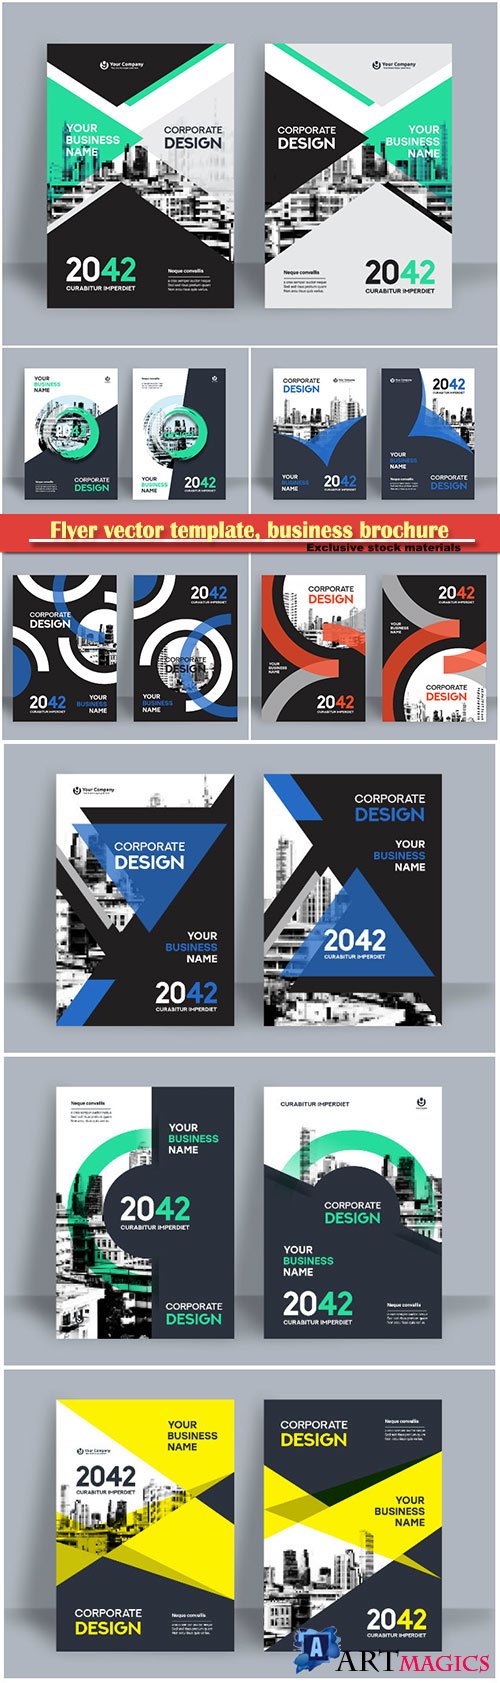 Flyer vector template, business brochure, magazine cover # 15